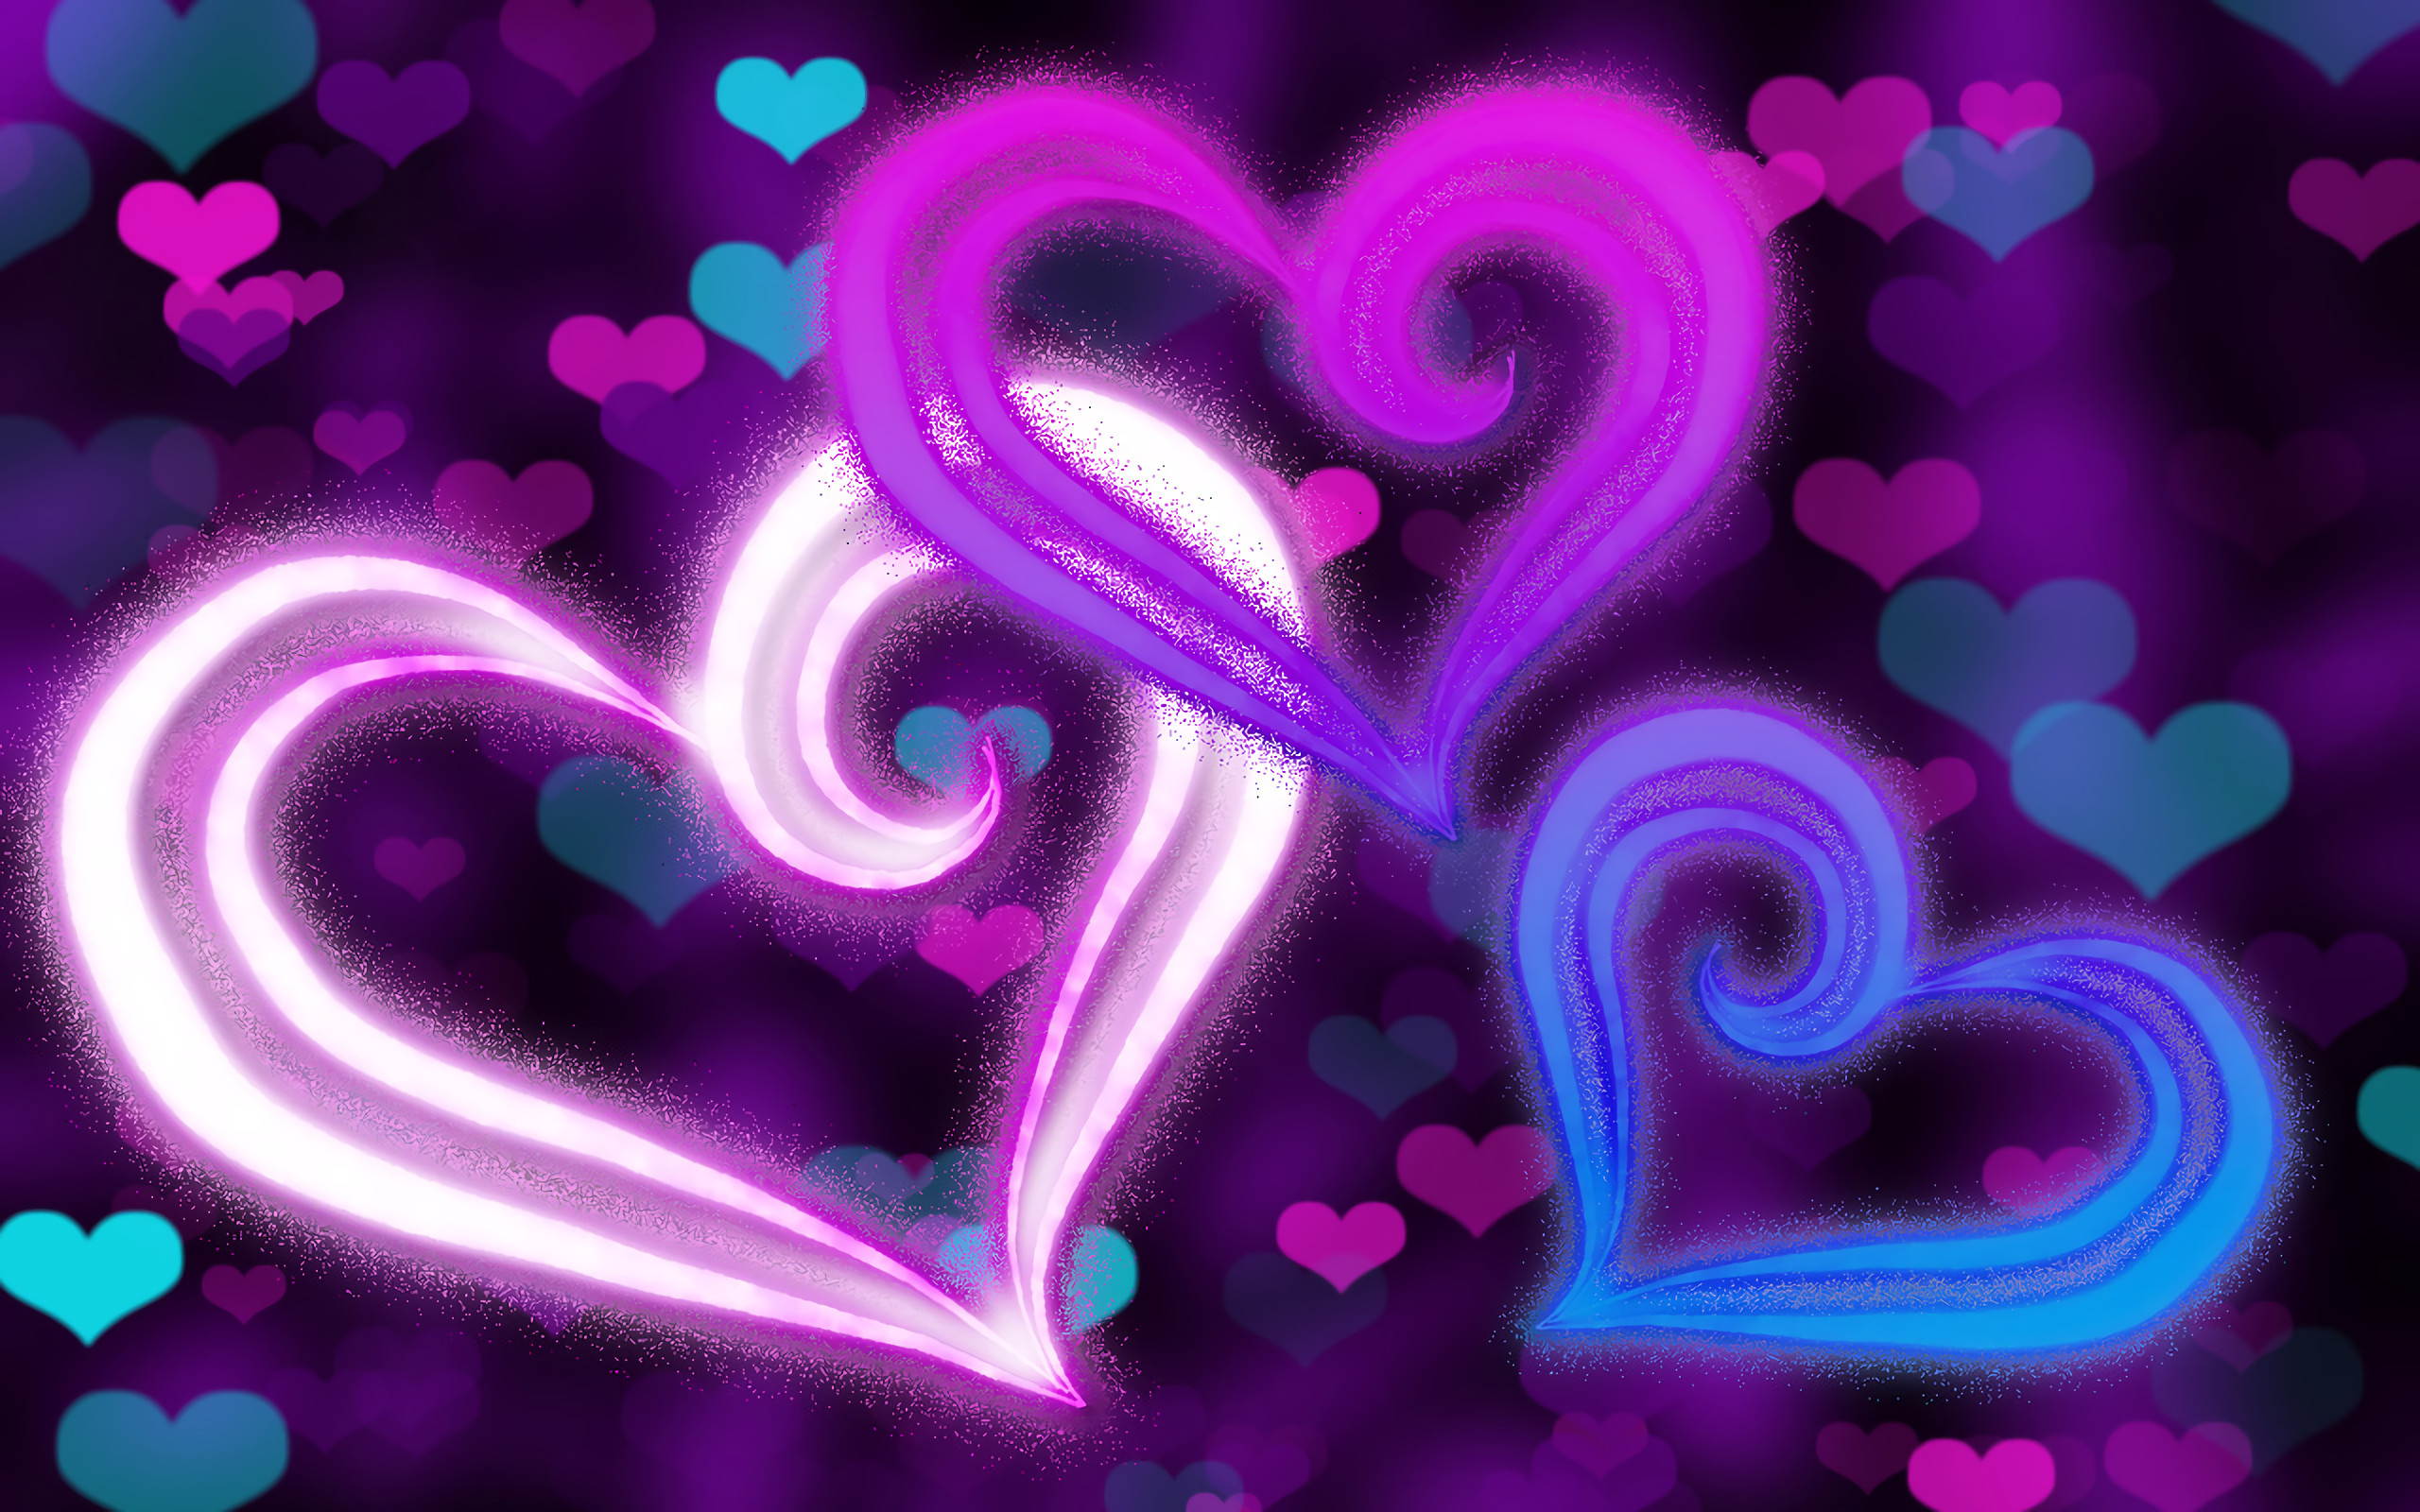 2560x1600 Find high quality hearts wallpapers and backgrounds on Desktop Nexus.